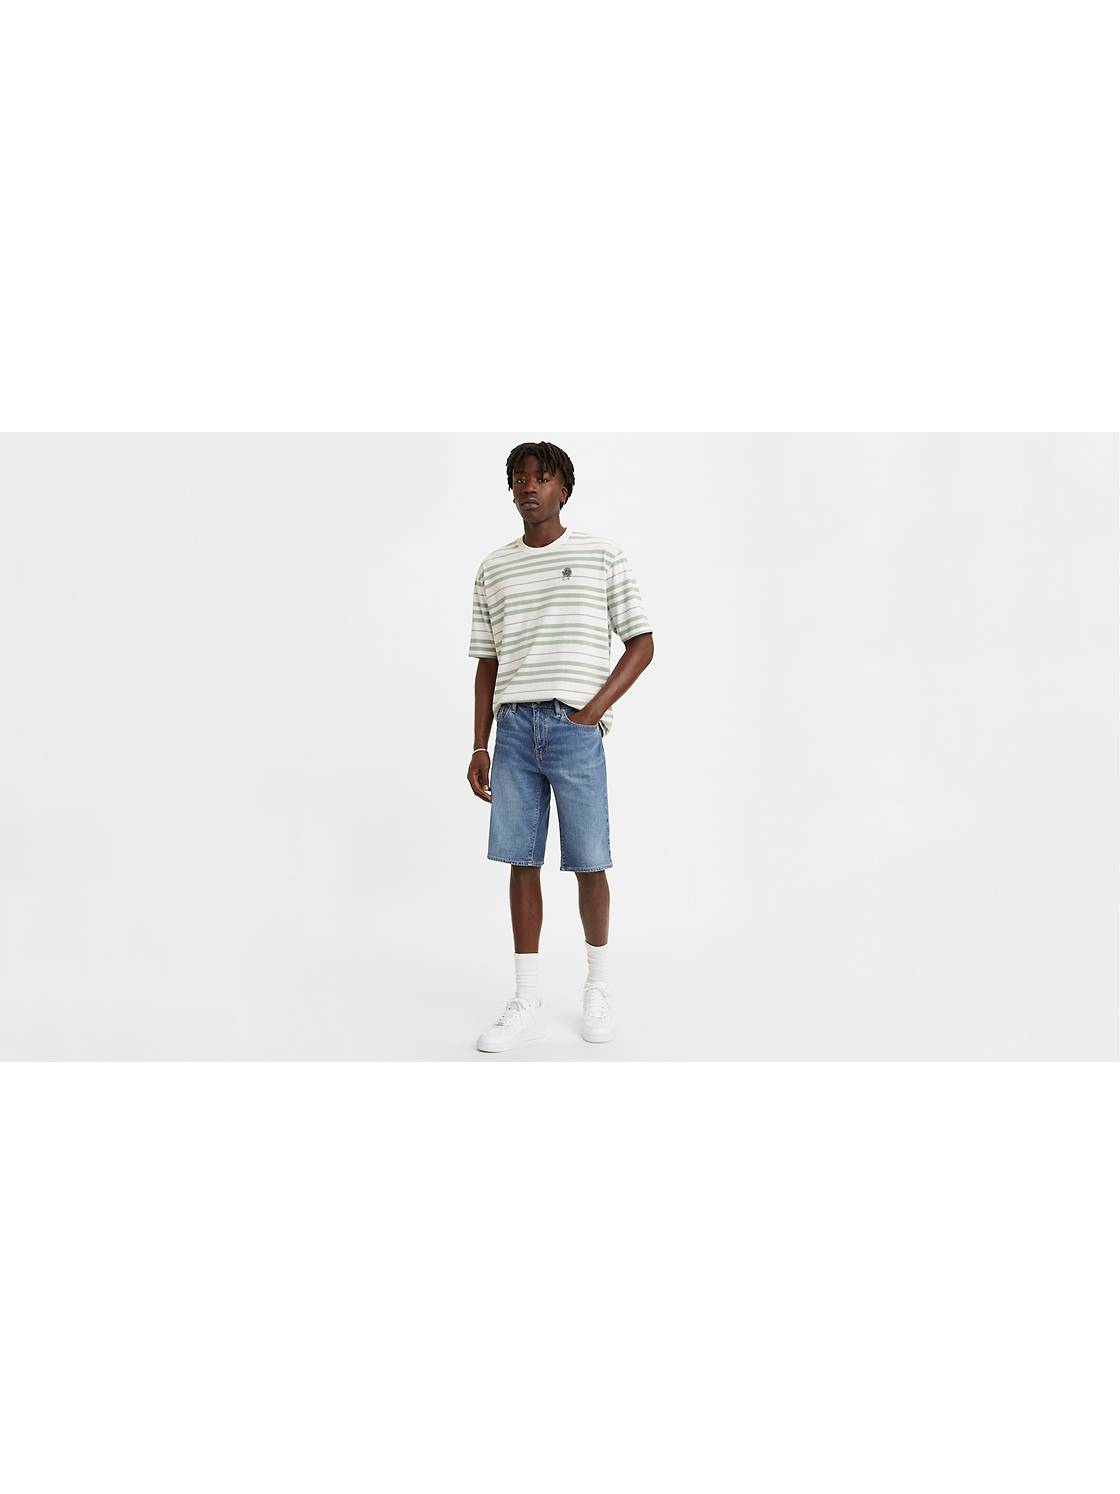 Shorts For Men - Cargo, Jean, Chino & More